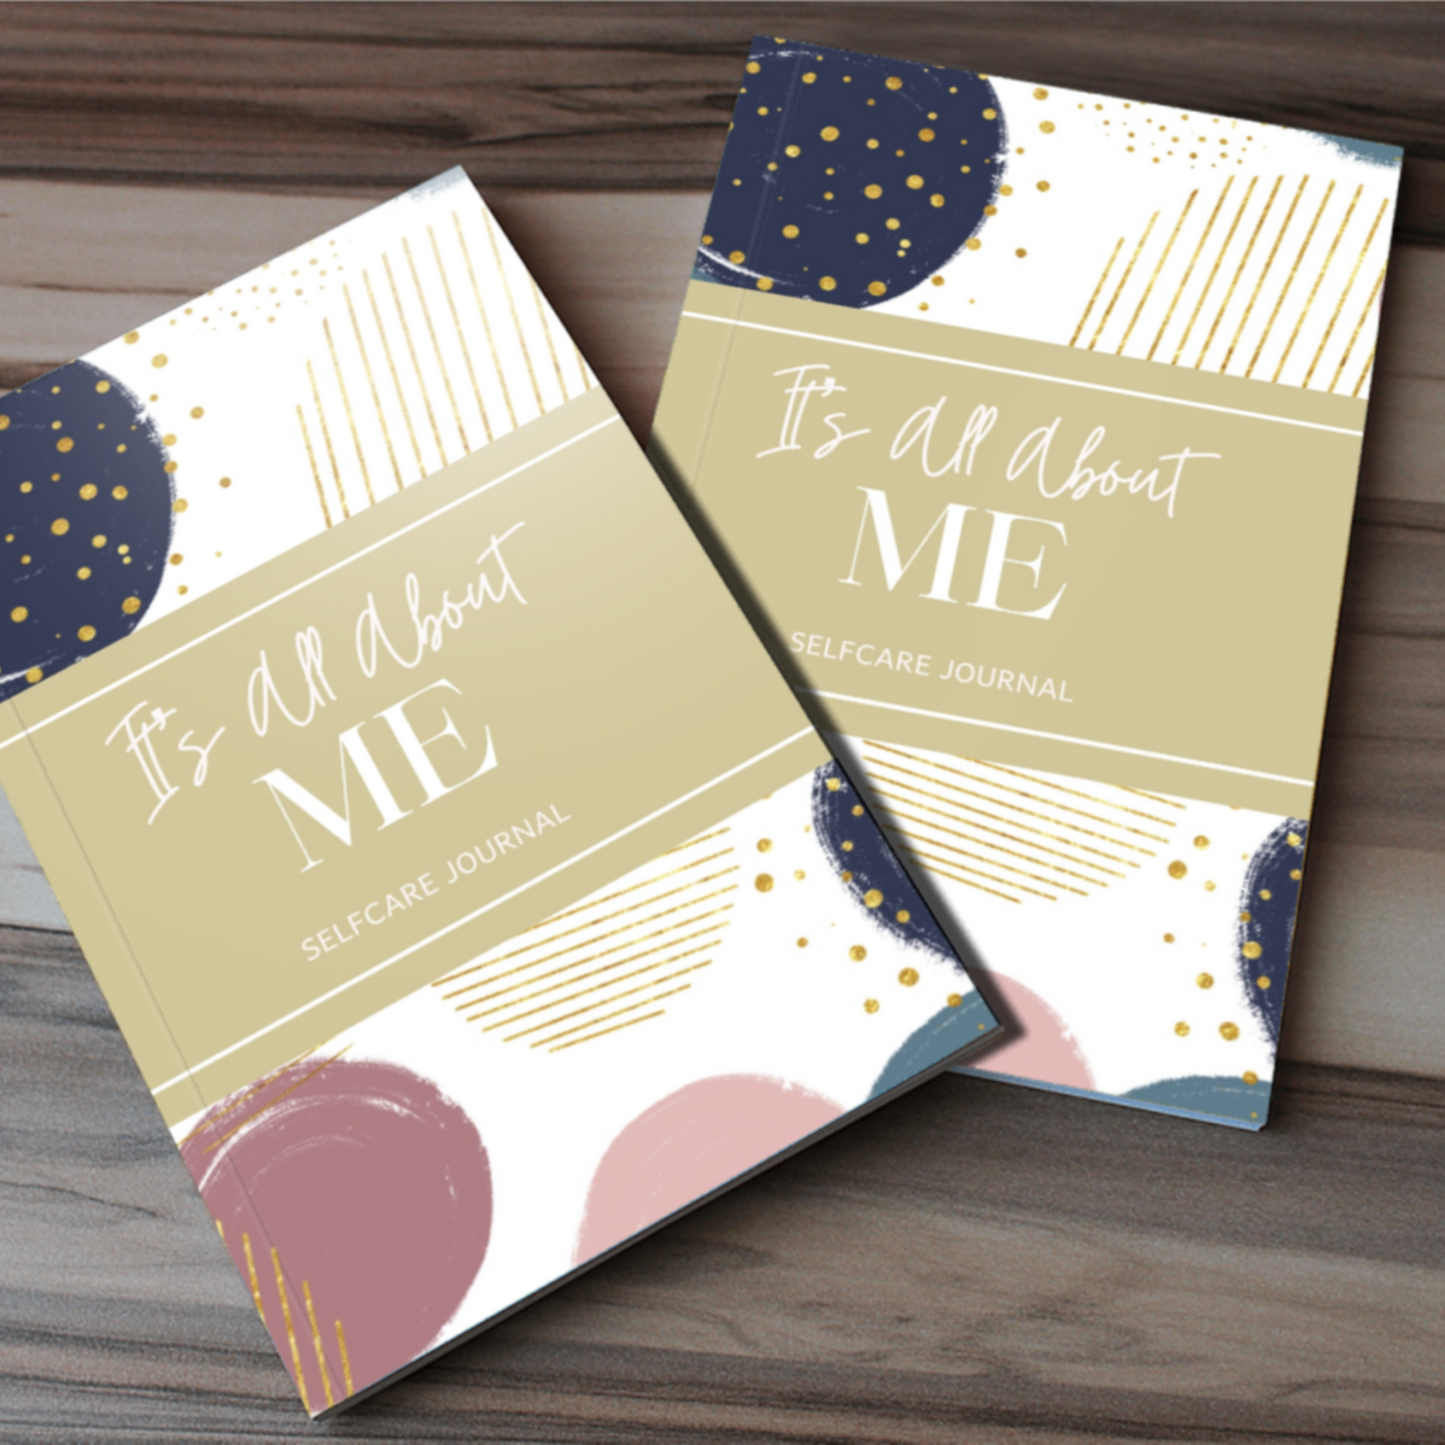 It's All About Me Self-Care Journal